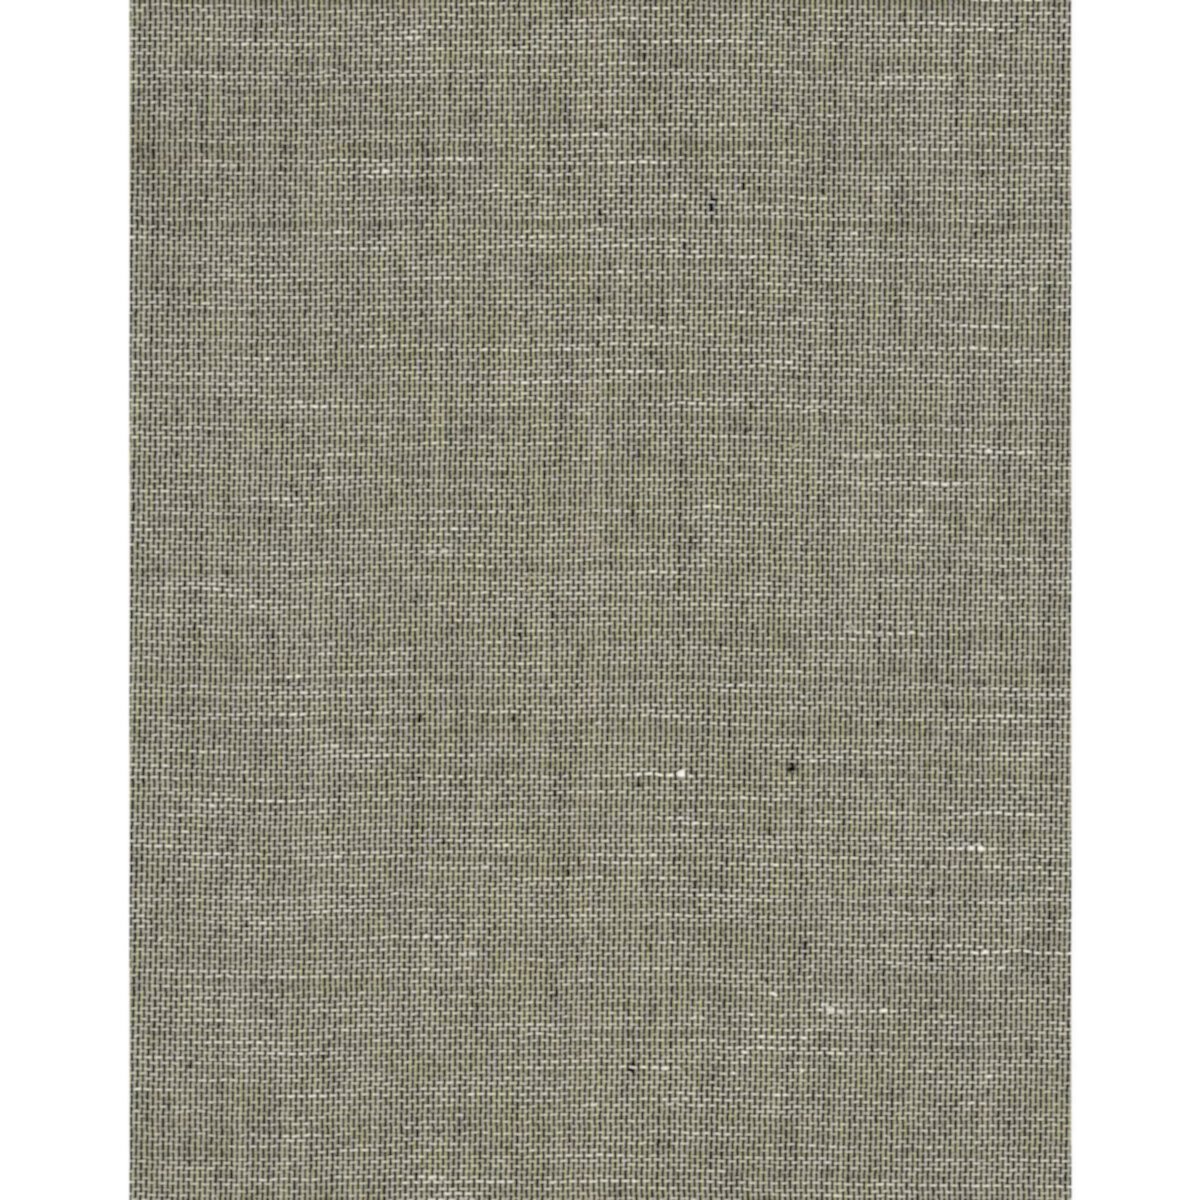 Outdoors In Crosshatch String Grasscloth Wallpaper York Wallcoverings